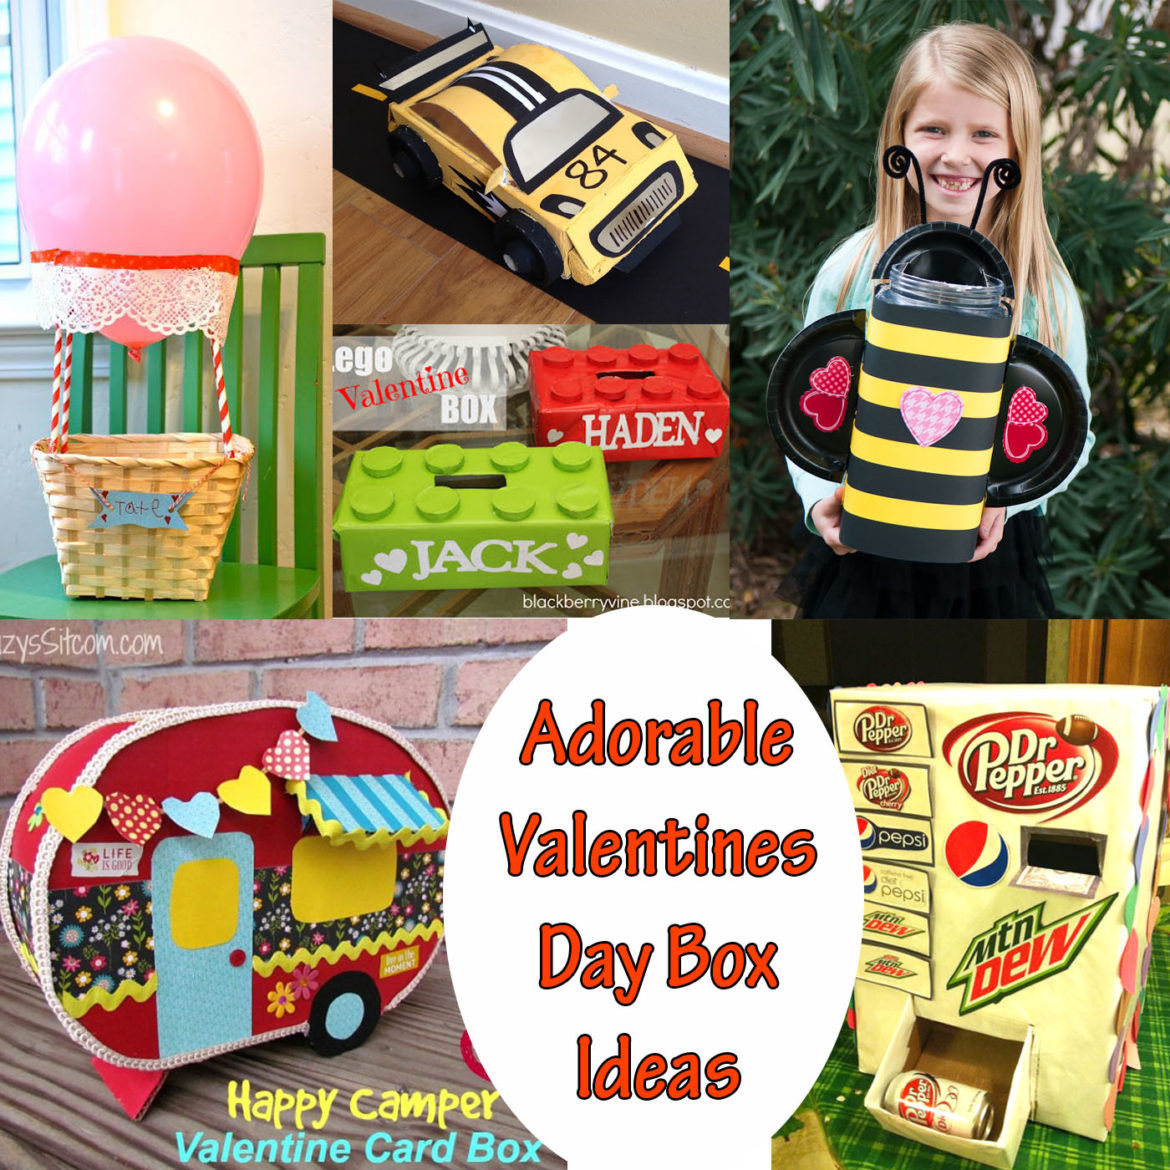 Valentines Day Box Ideas
 Adorable Valentines Day Box Ideas The Keeper of the Cheerios